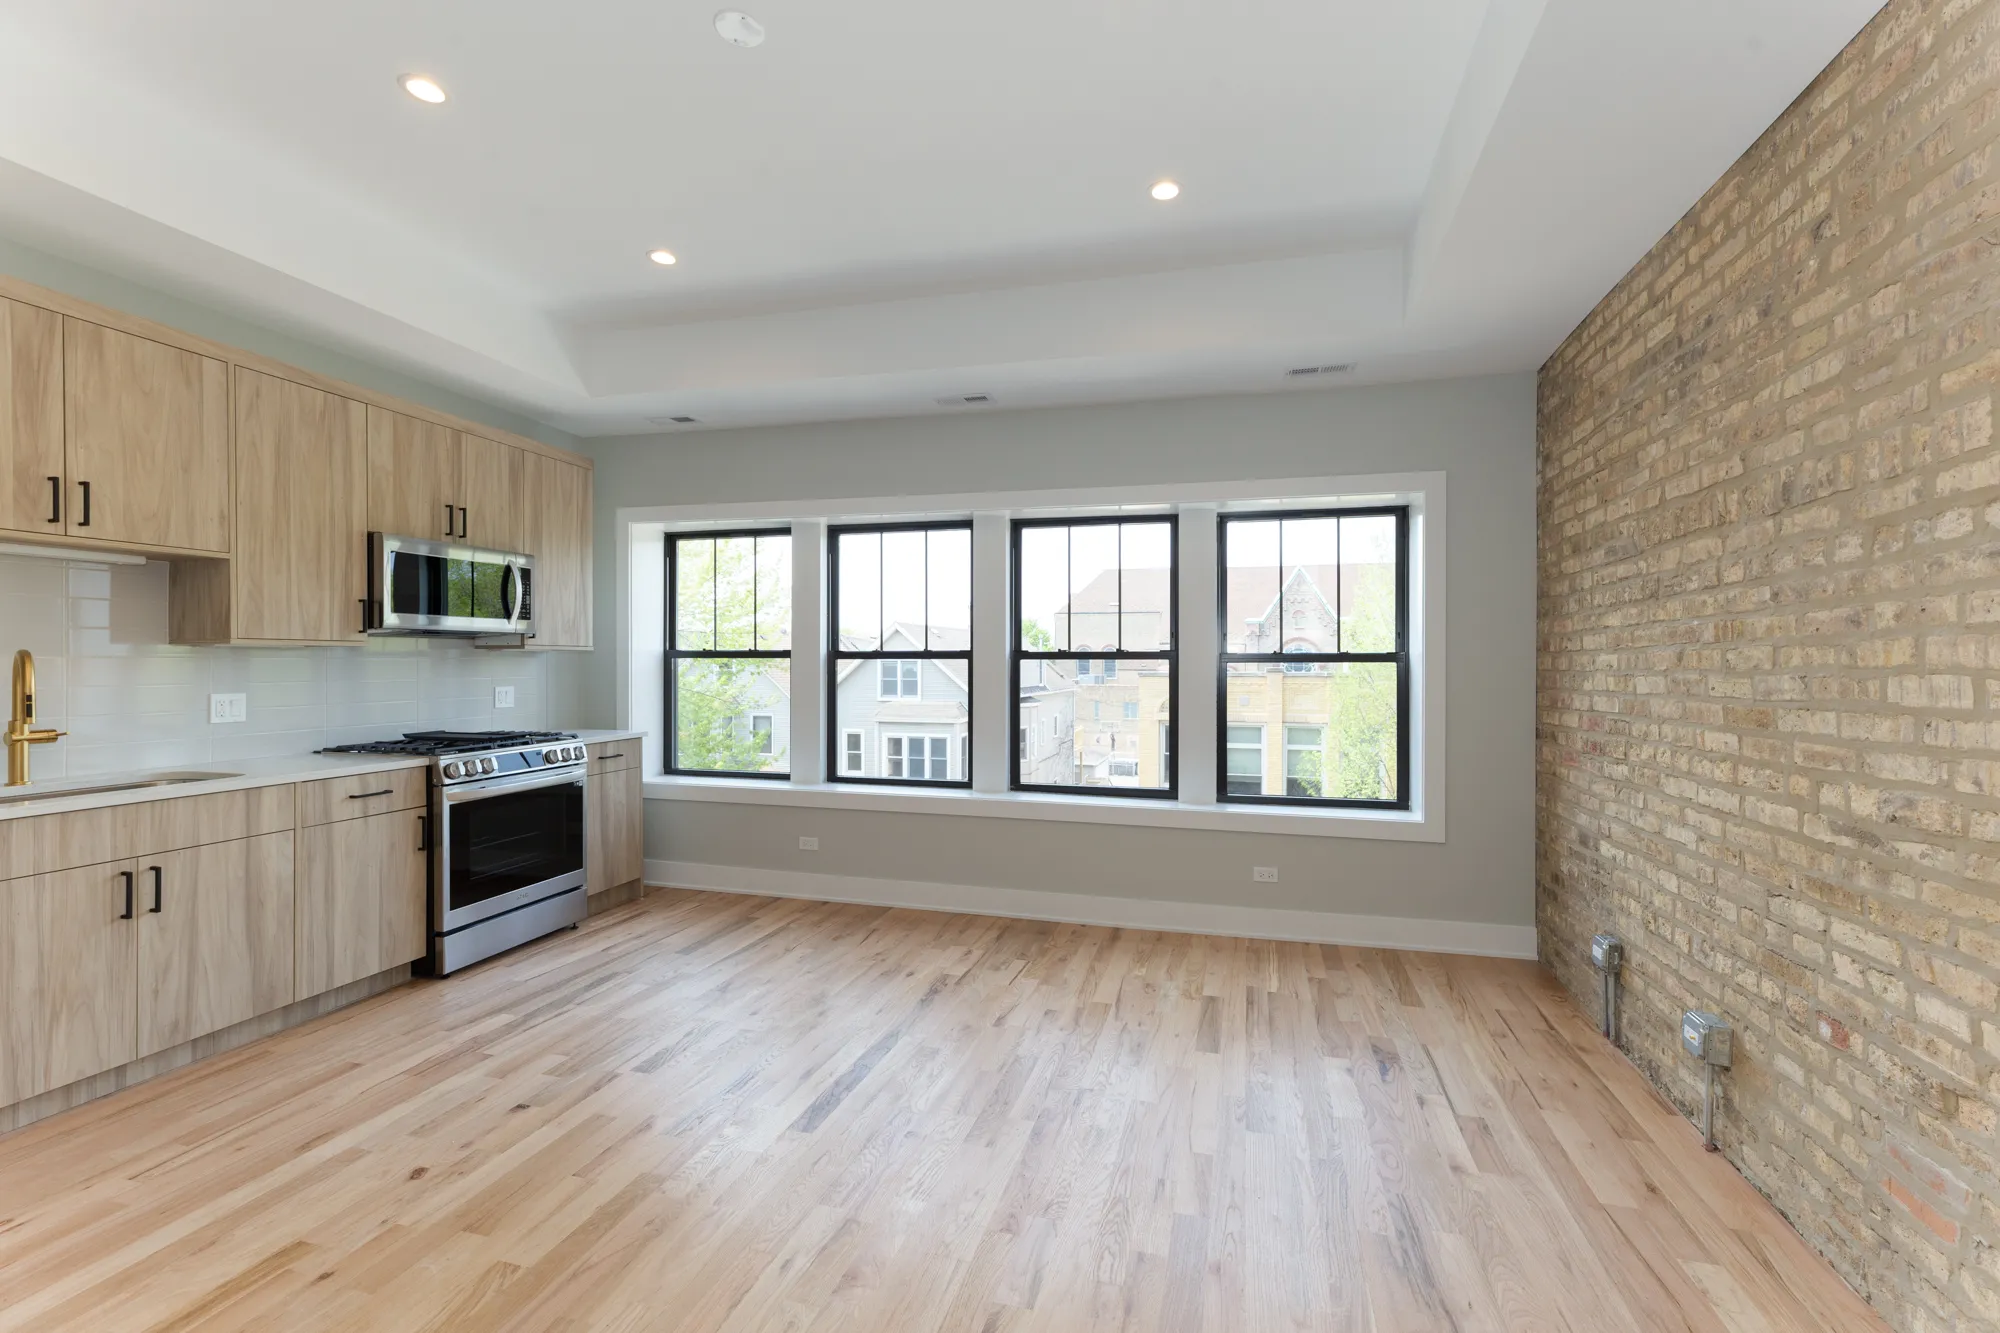 2535 N CAMPBELL AVE 60647-unit#3-Chicago-IL